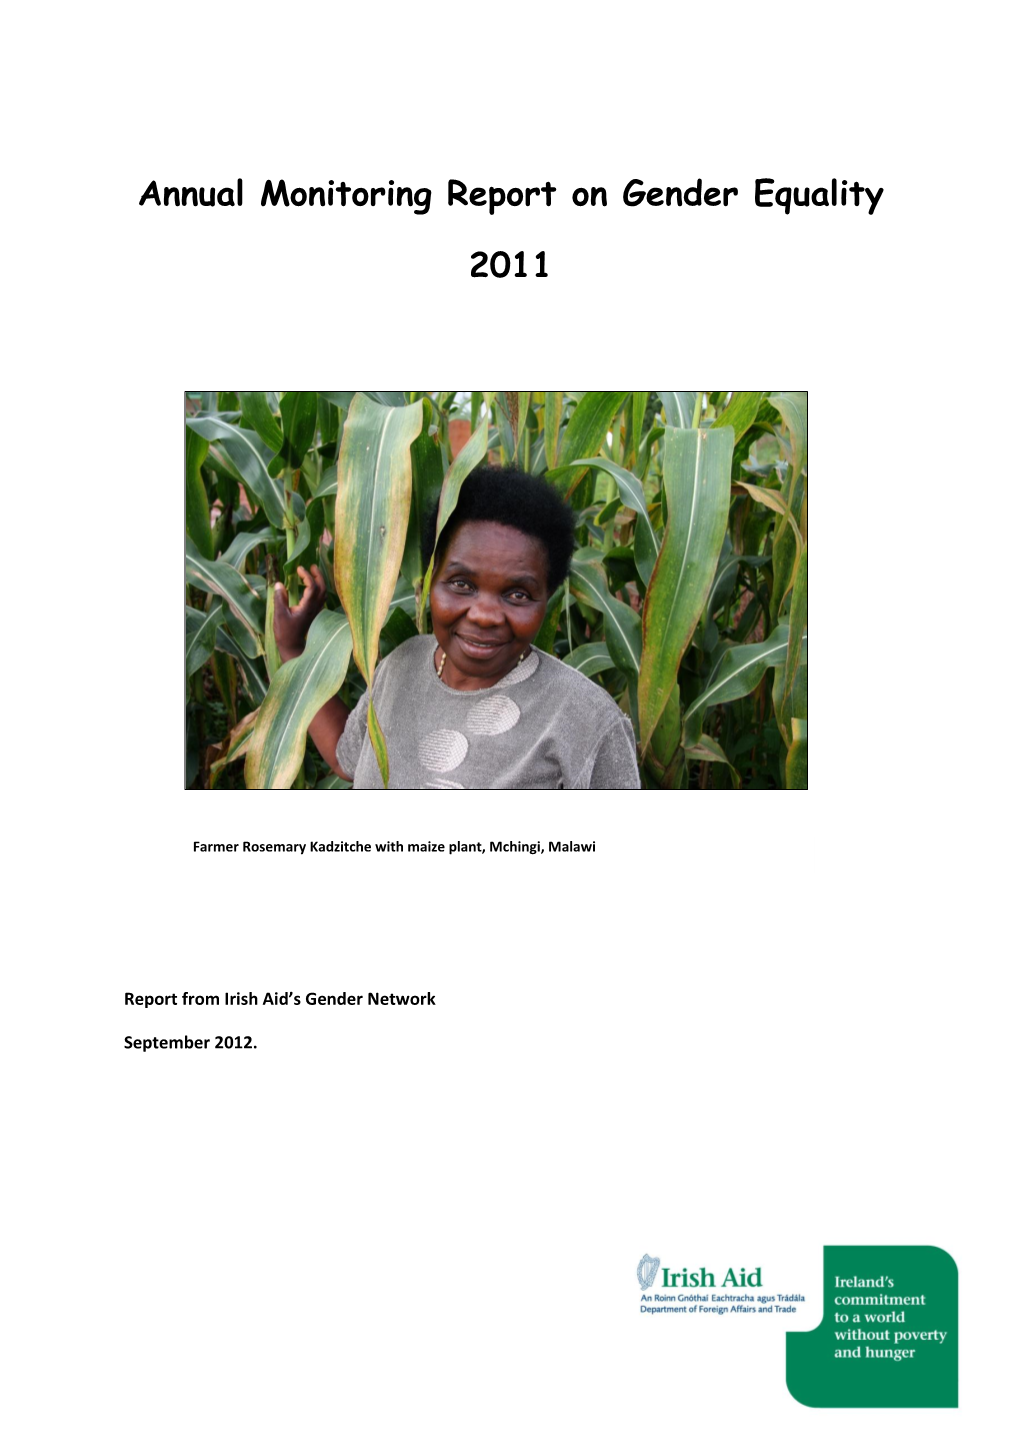 Annual Monitoring Report on Gender Equality 2011